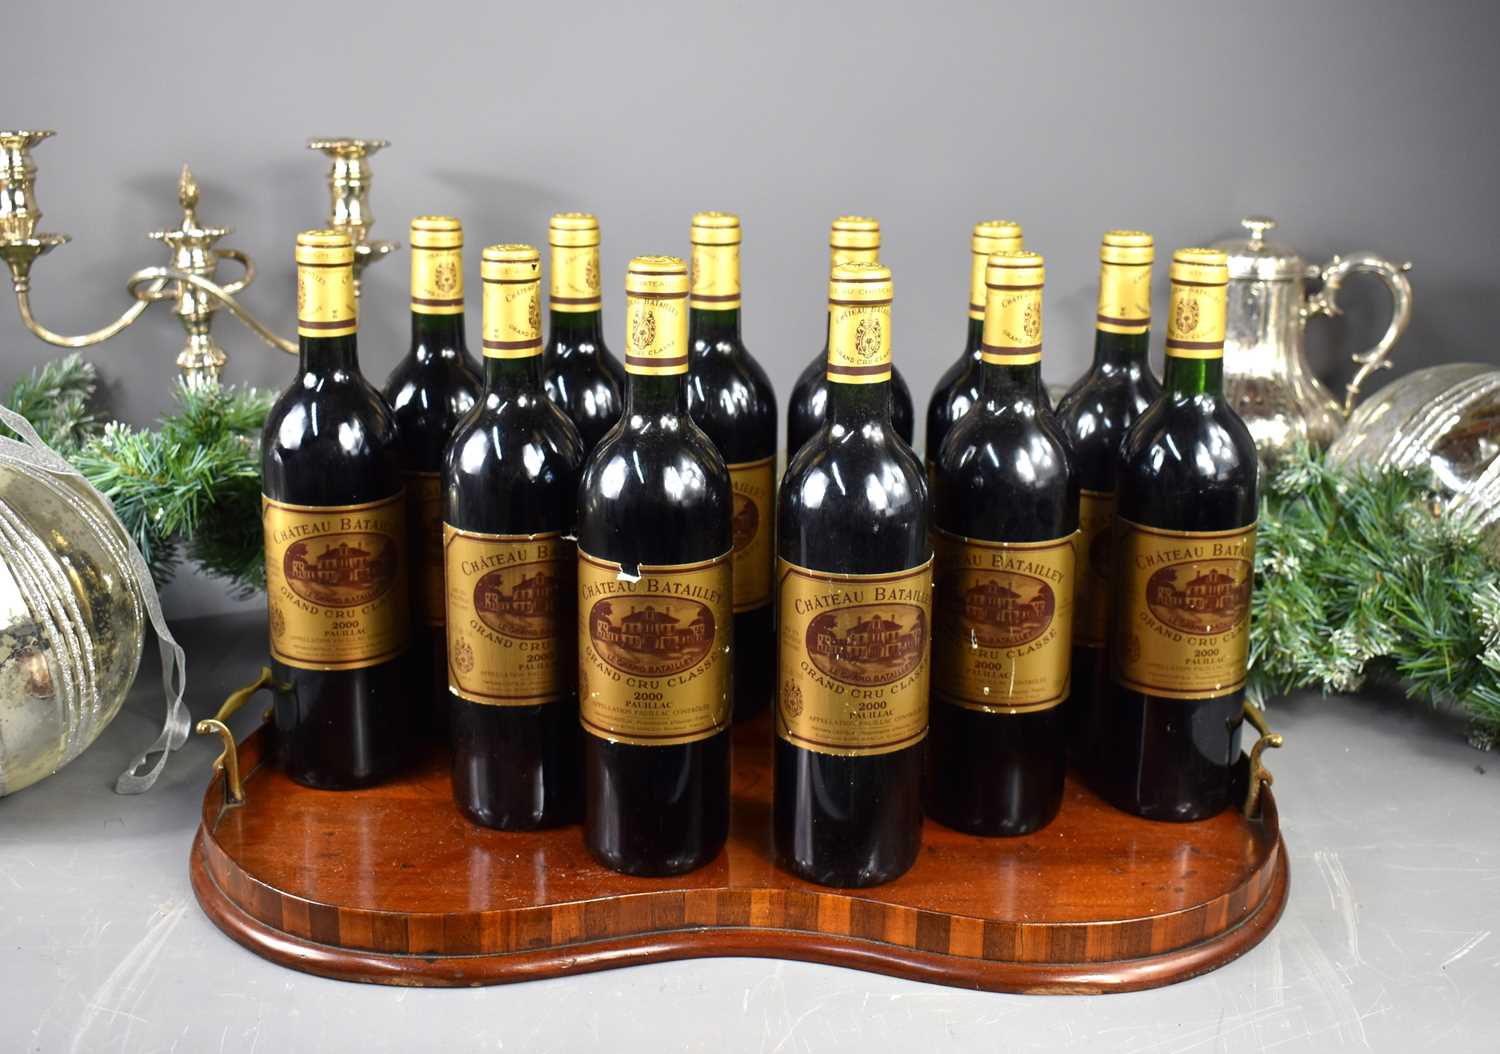 Lot 58 - Twelve bottles of Chateau Batailley red wine,...